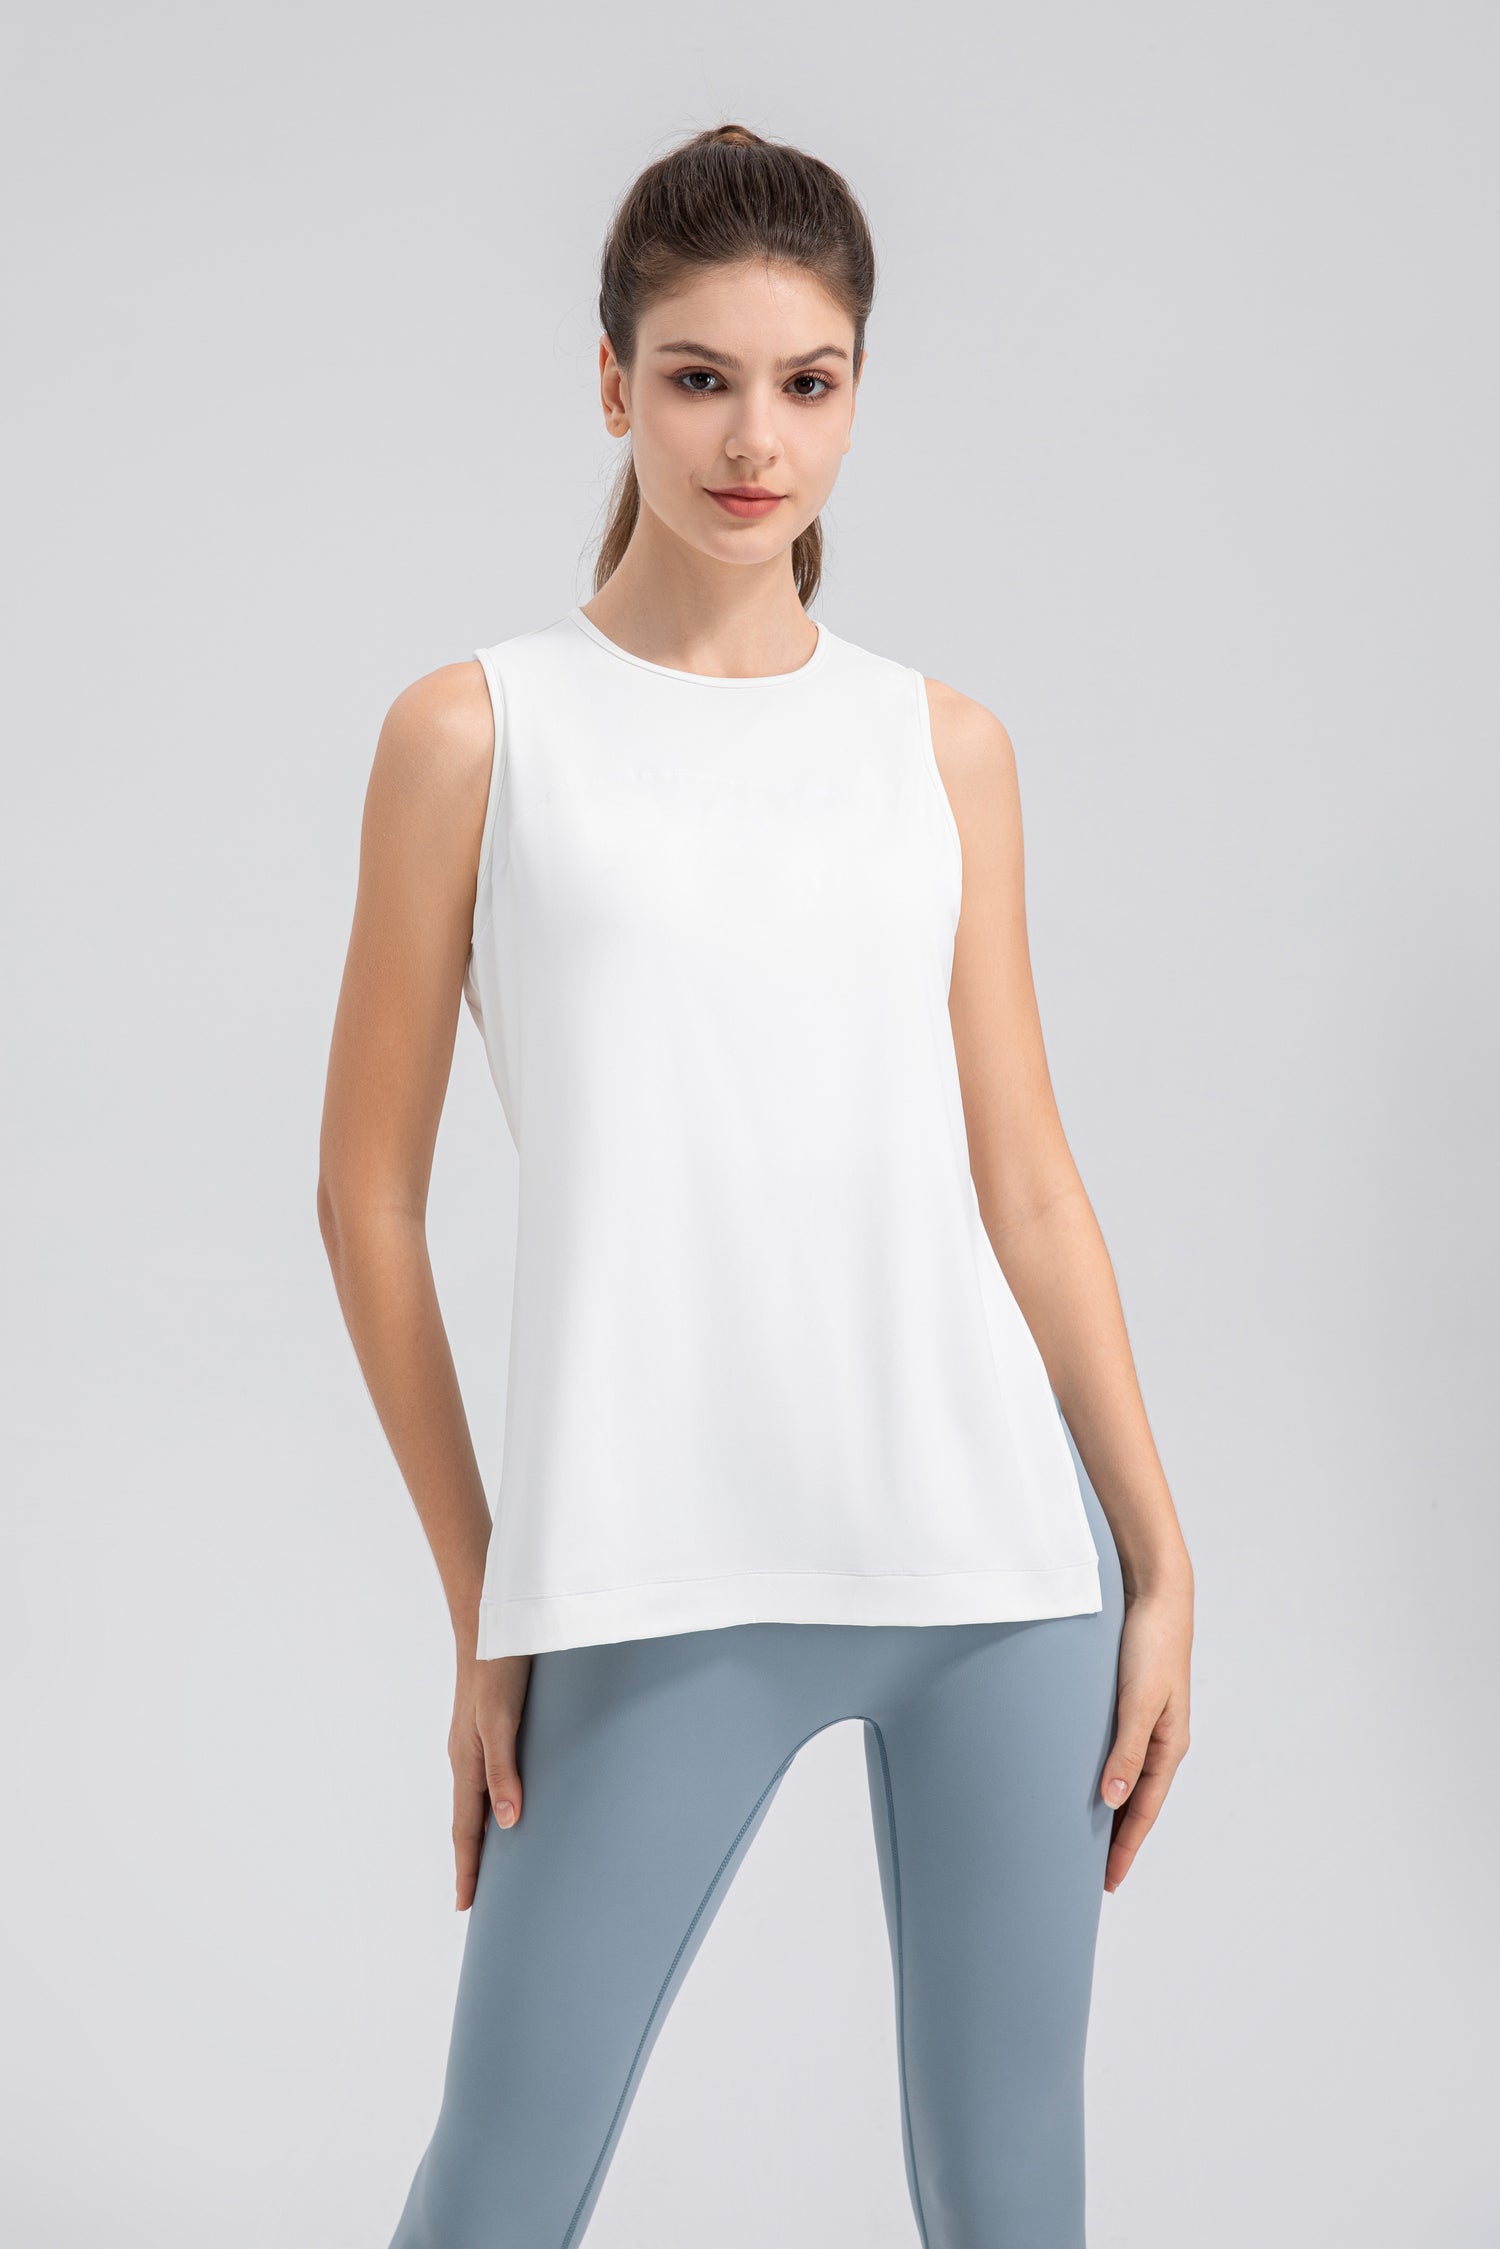 Cooling & Buttery Soft Feather Top